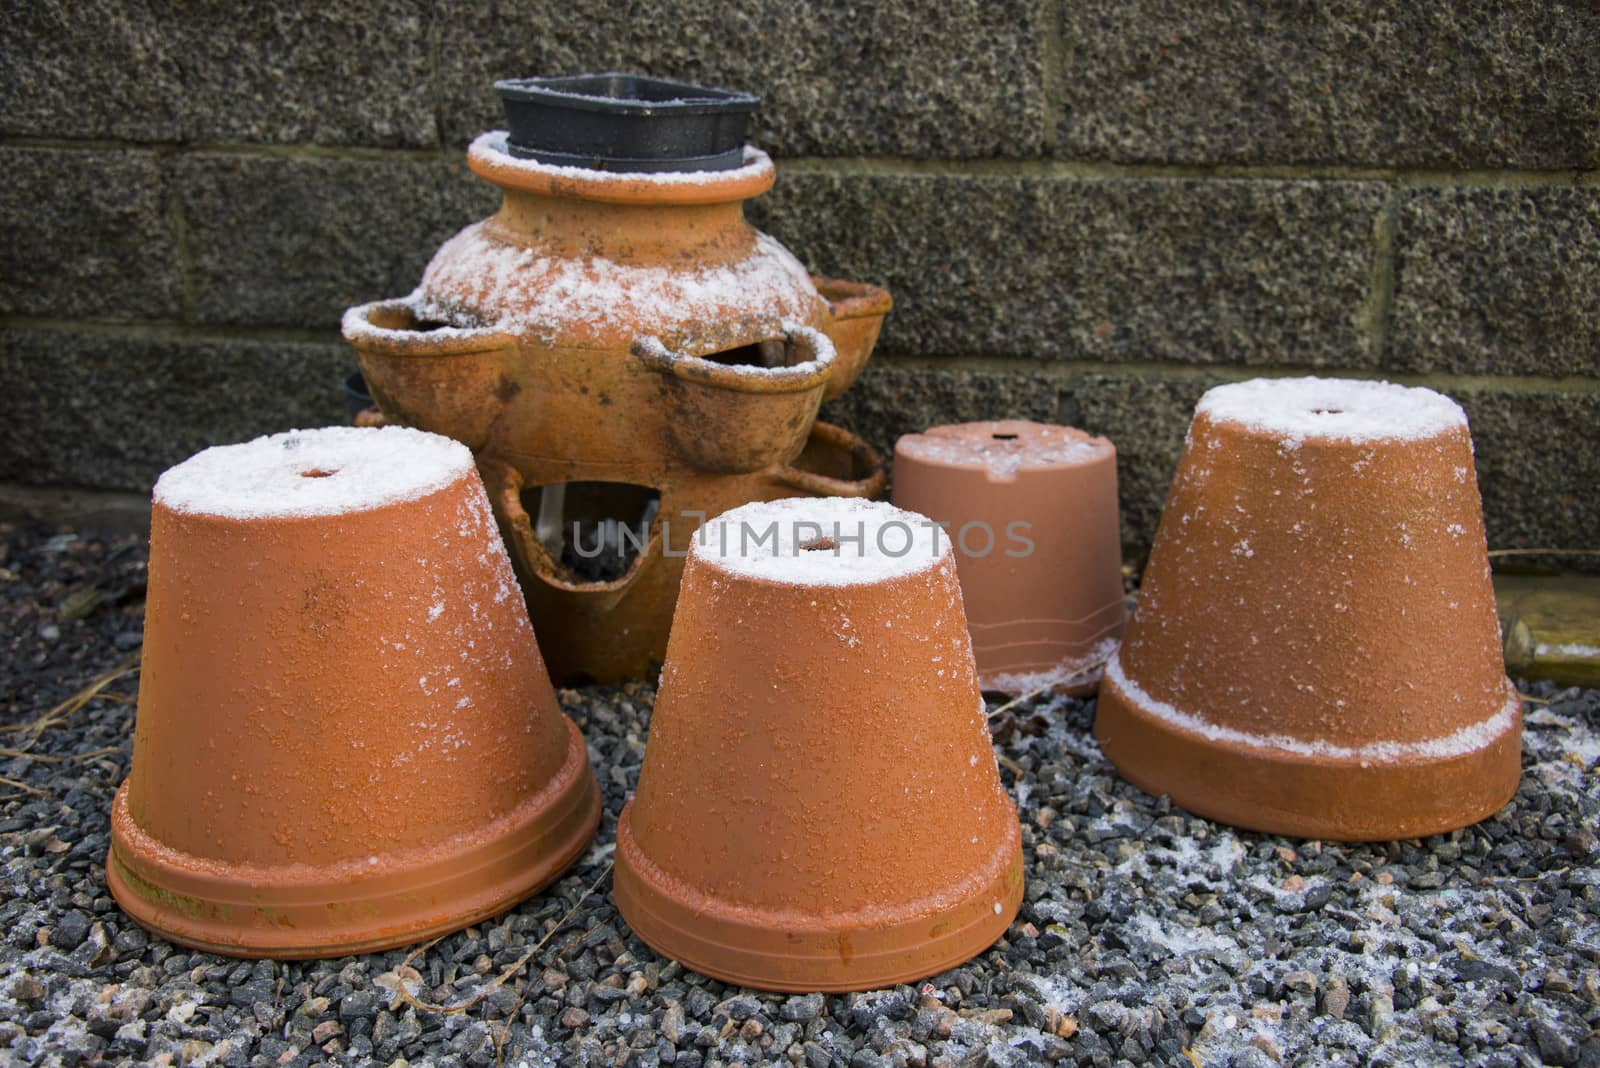 Garden terracotta pots covered in ice and snow